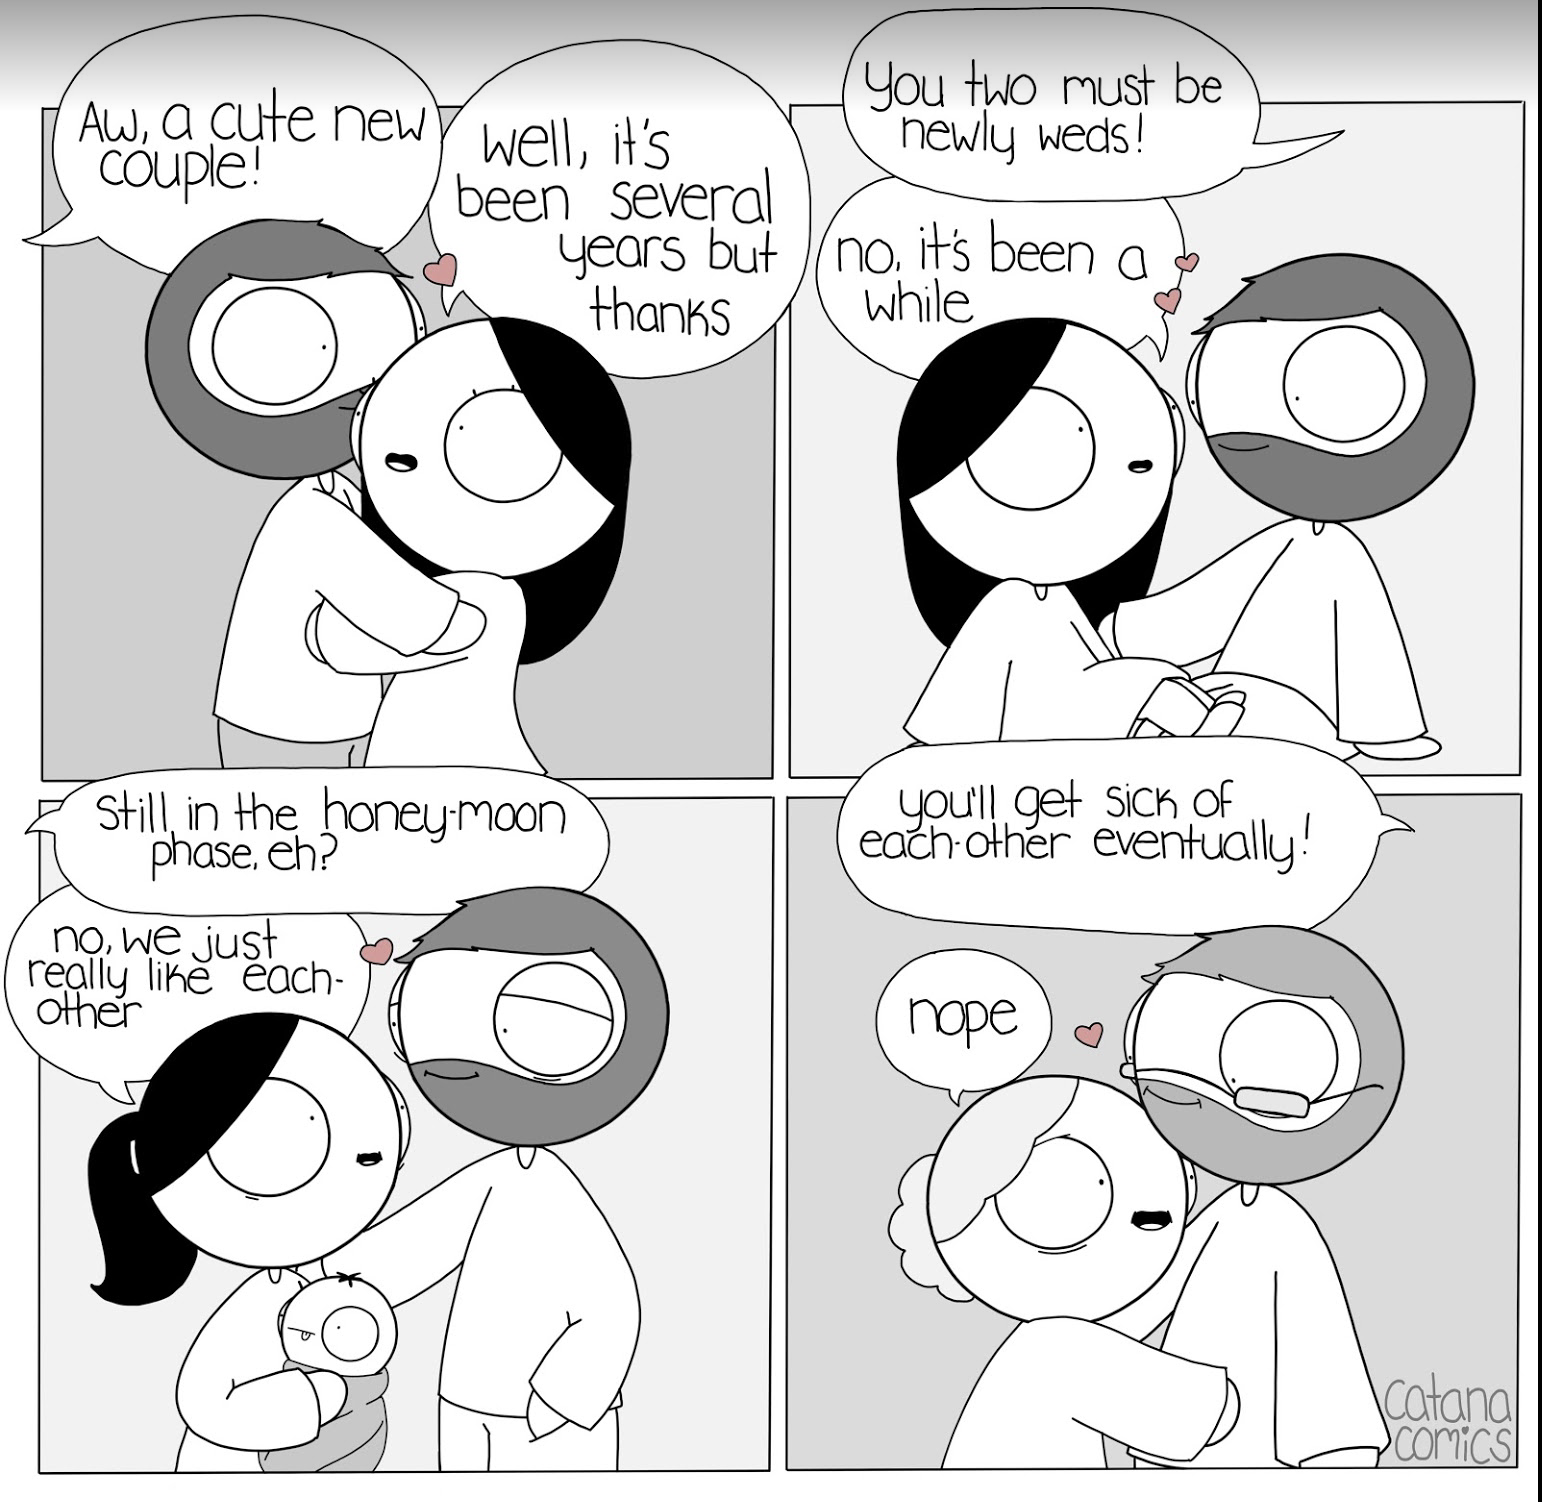 couple funny comics - Aw, a cute new 7 well, it's You two must be newly weds! couple! been several years but no, it's been a thanks while Still in the honeymoon phase eh? you'll get sick of each other eventually! no we just really each other Bocs